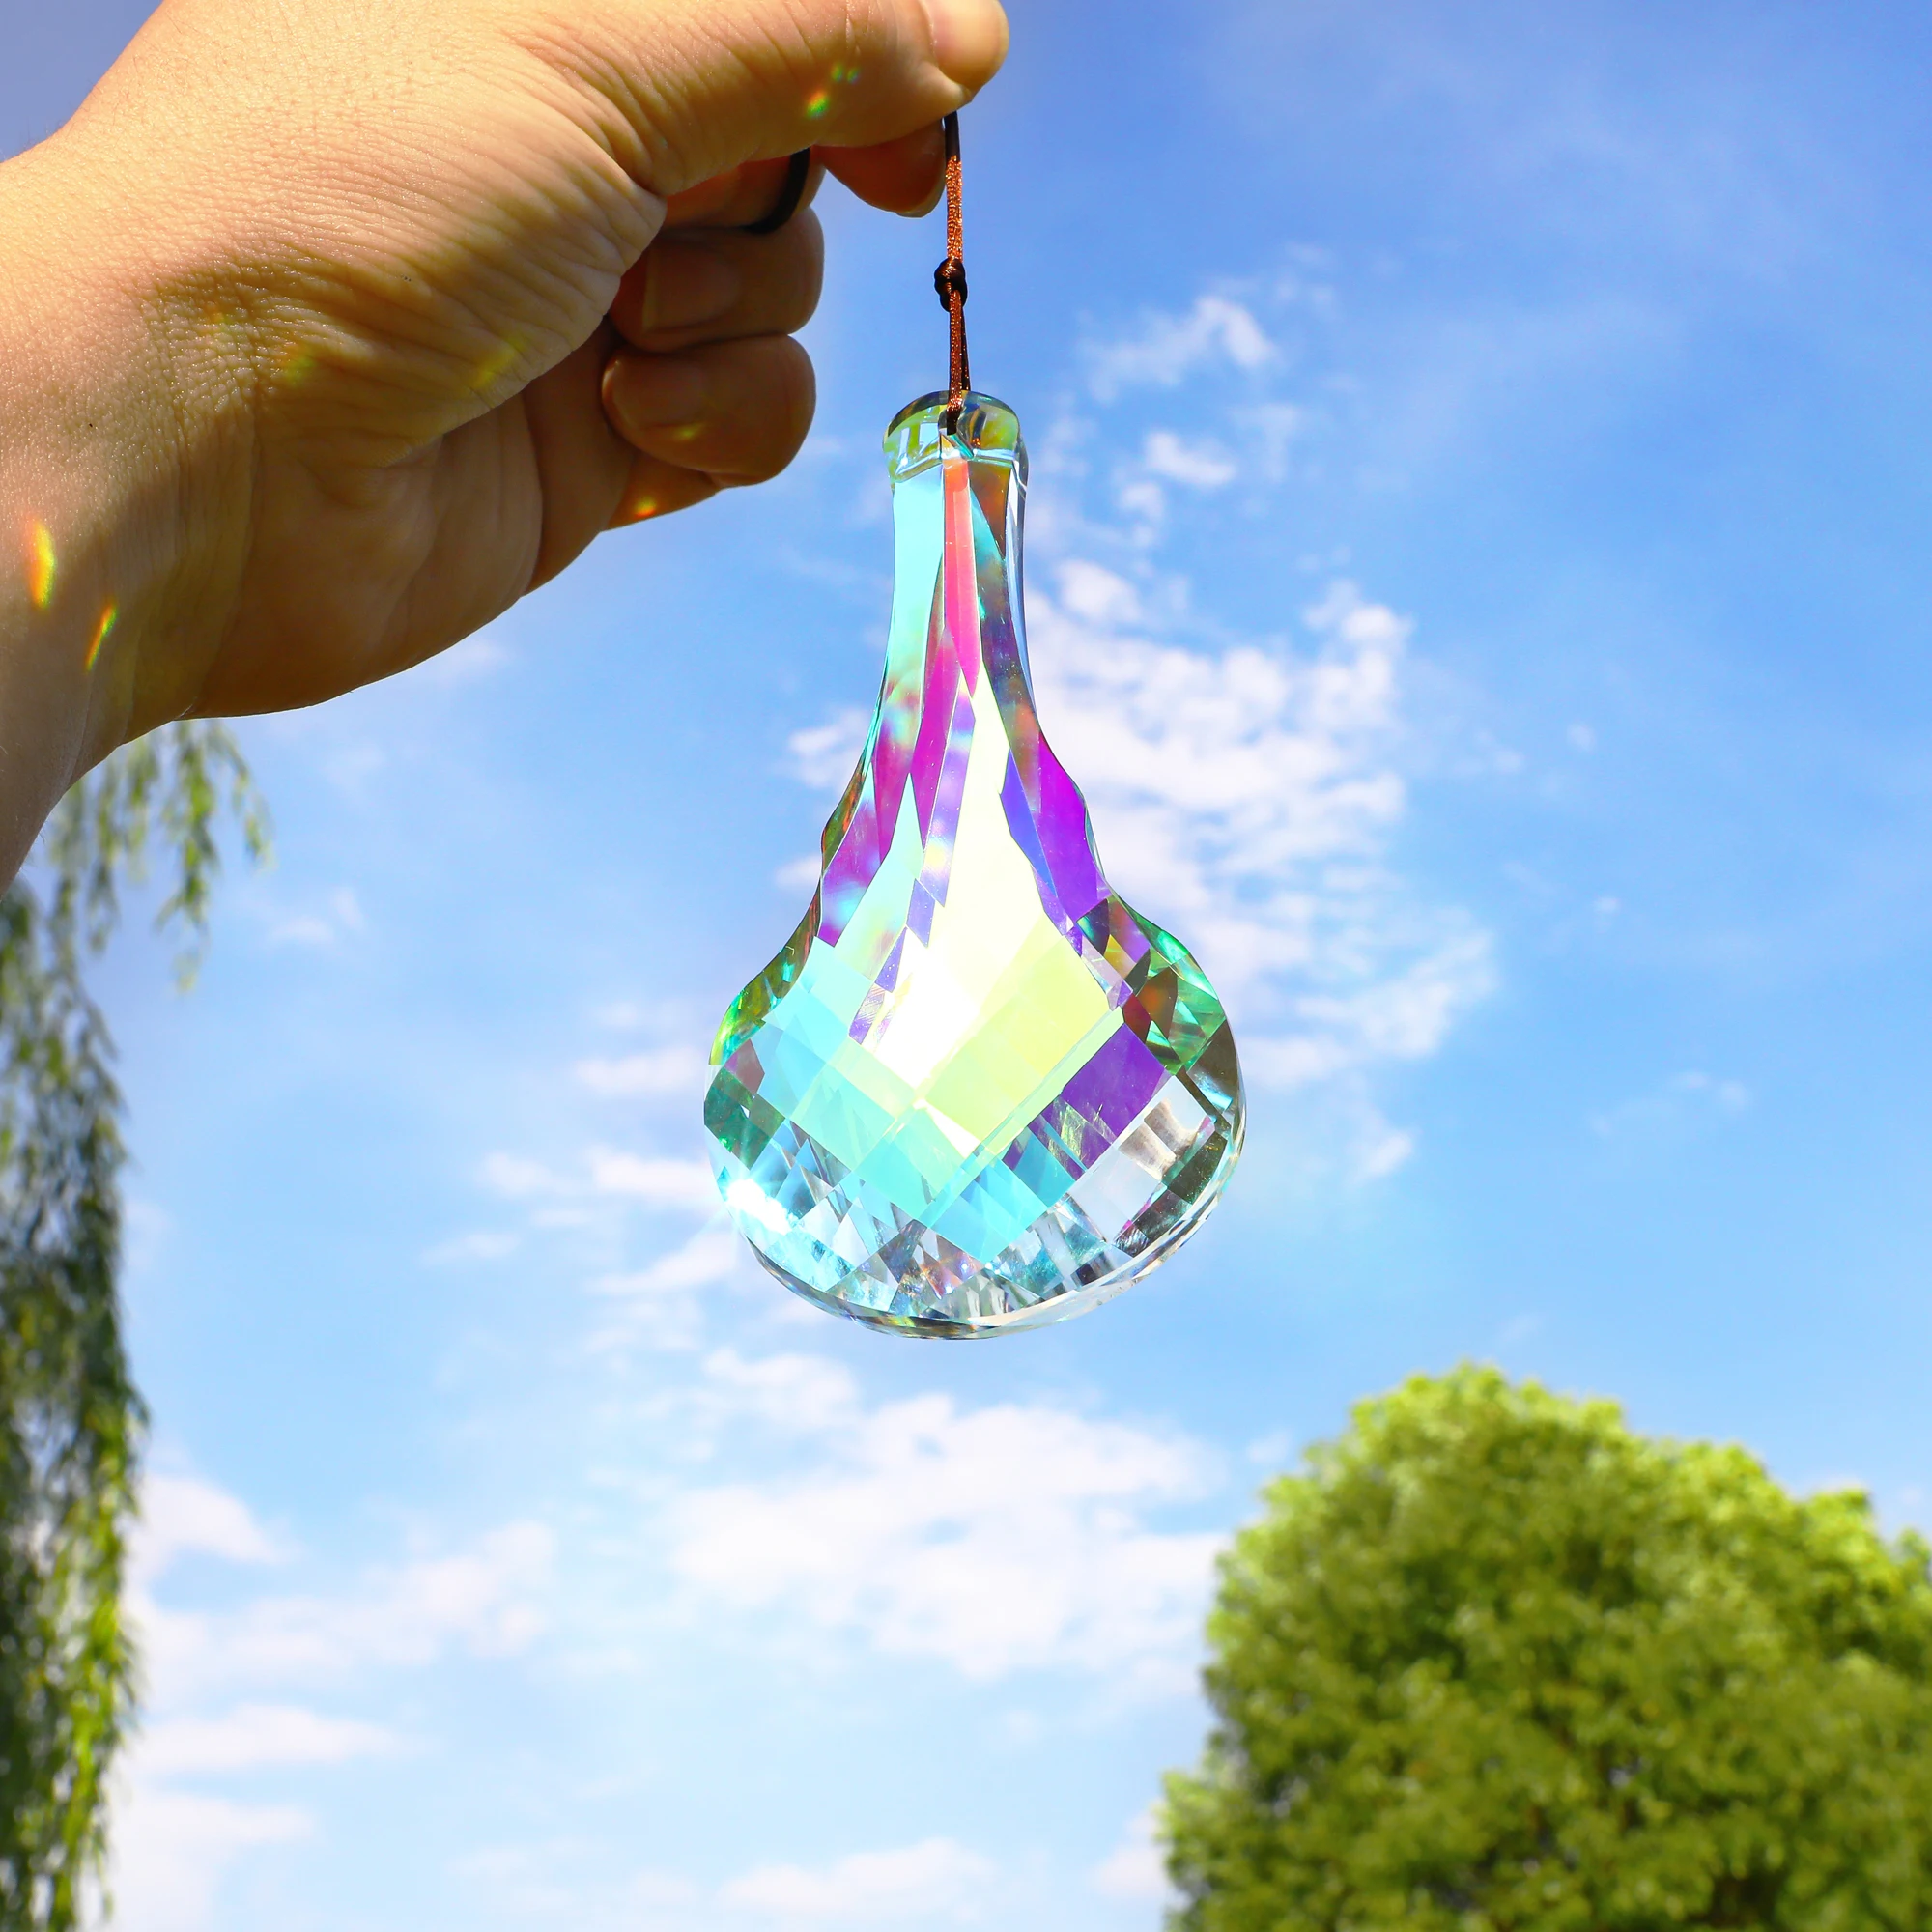 https://ae01.alicdn.com/kf/Sb775486b06ef4ba397dfcf5d23c4fde1Z/H-D-120mm-AB-Coating-Hanging-Crystal-Prism-Sun-Catcher-Glass-Rainbow-Prism-Ornament-Faceted-Window.jpg